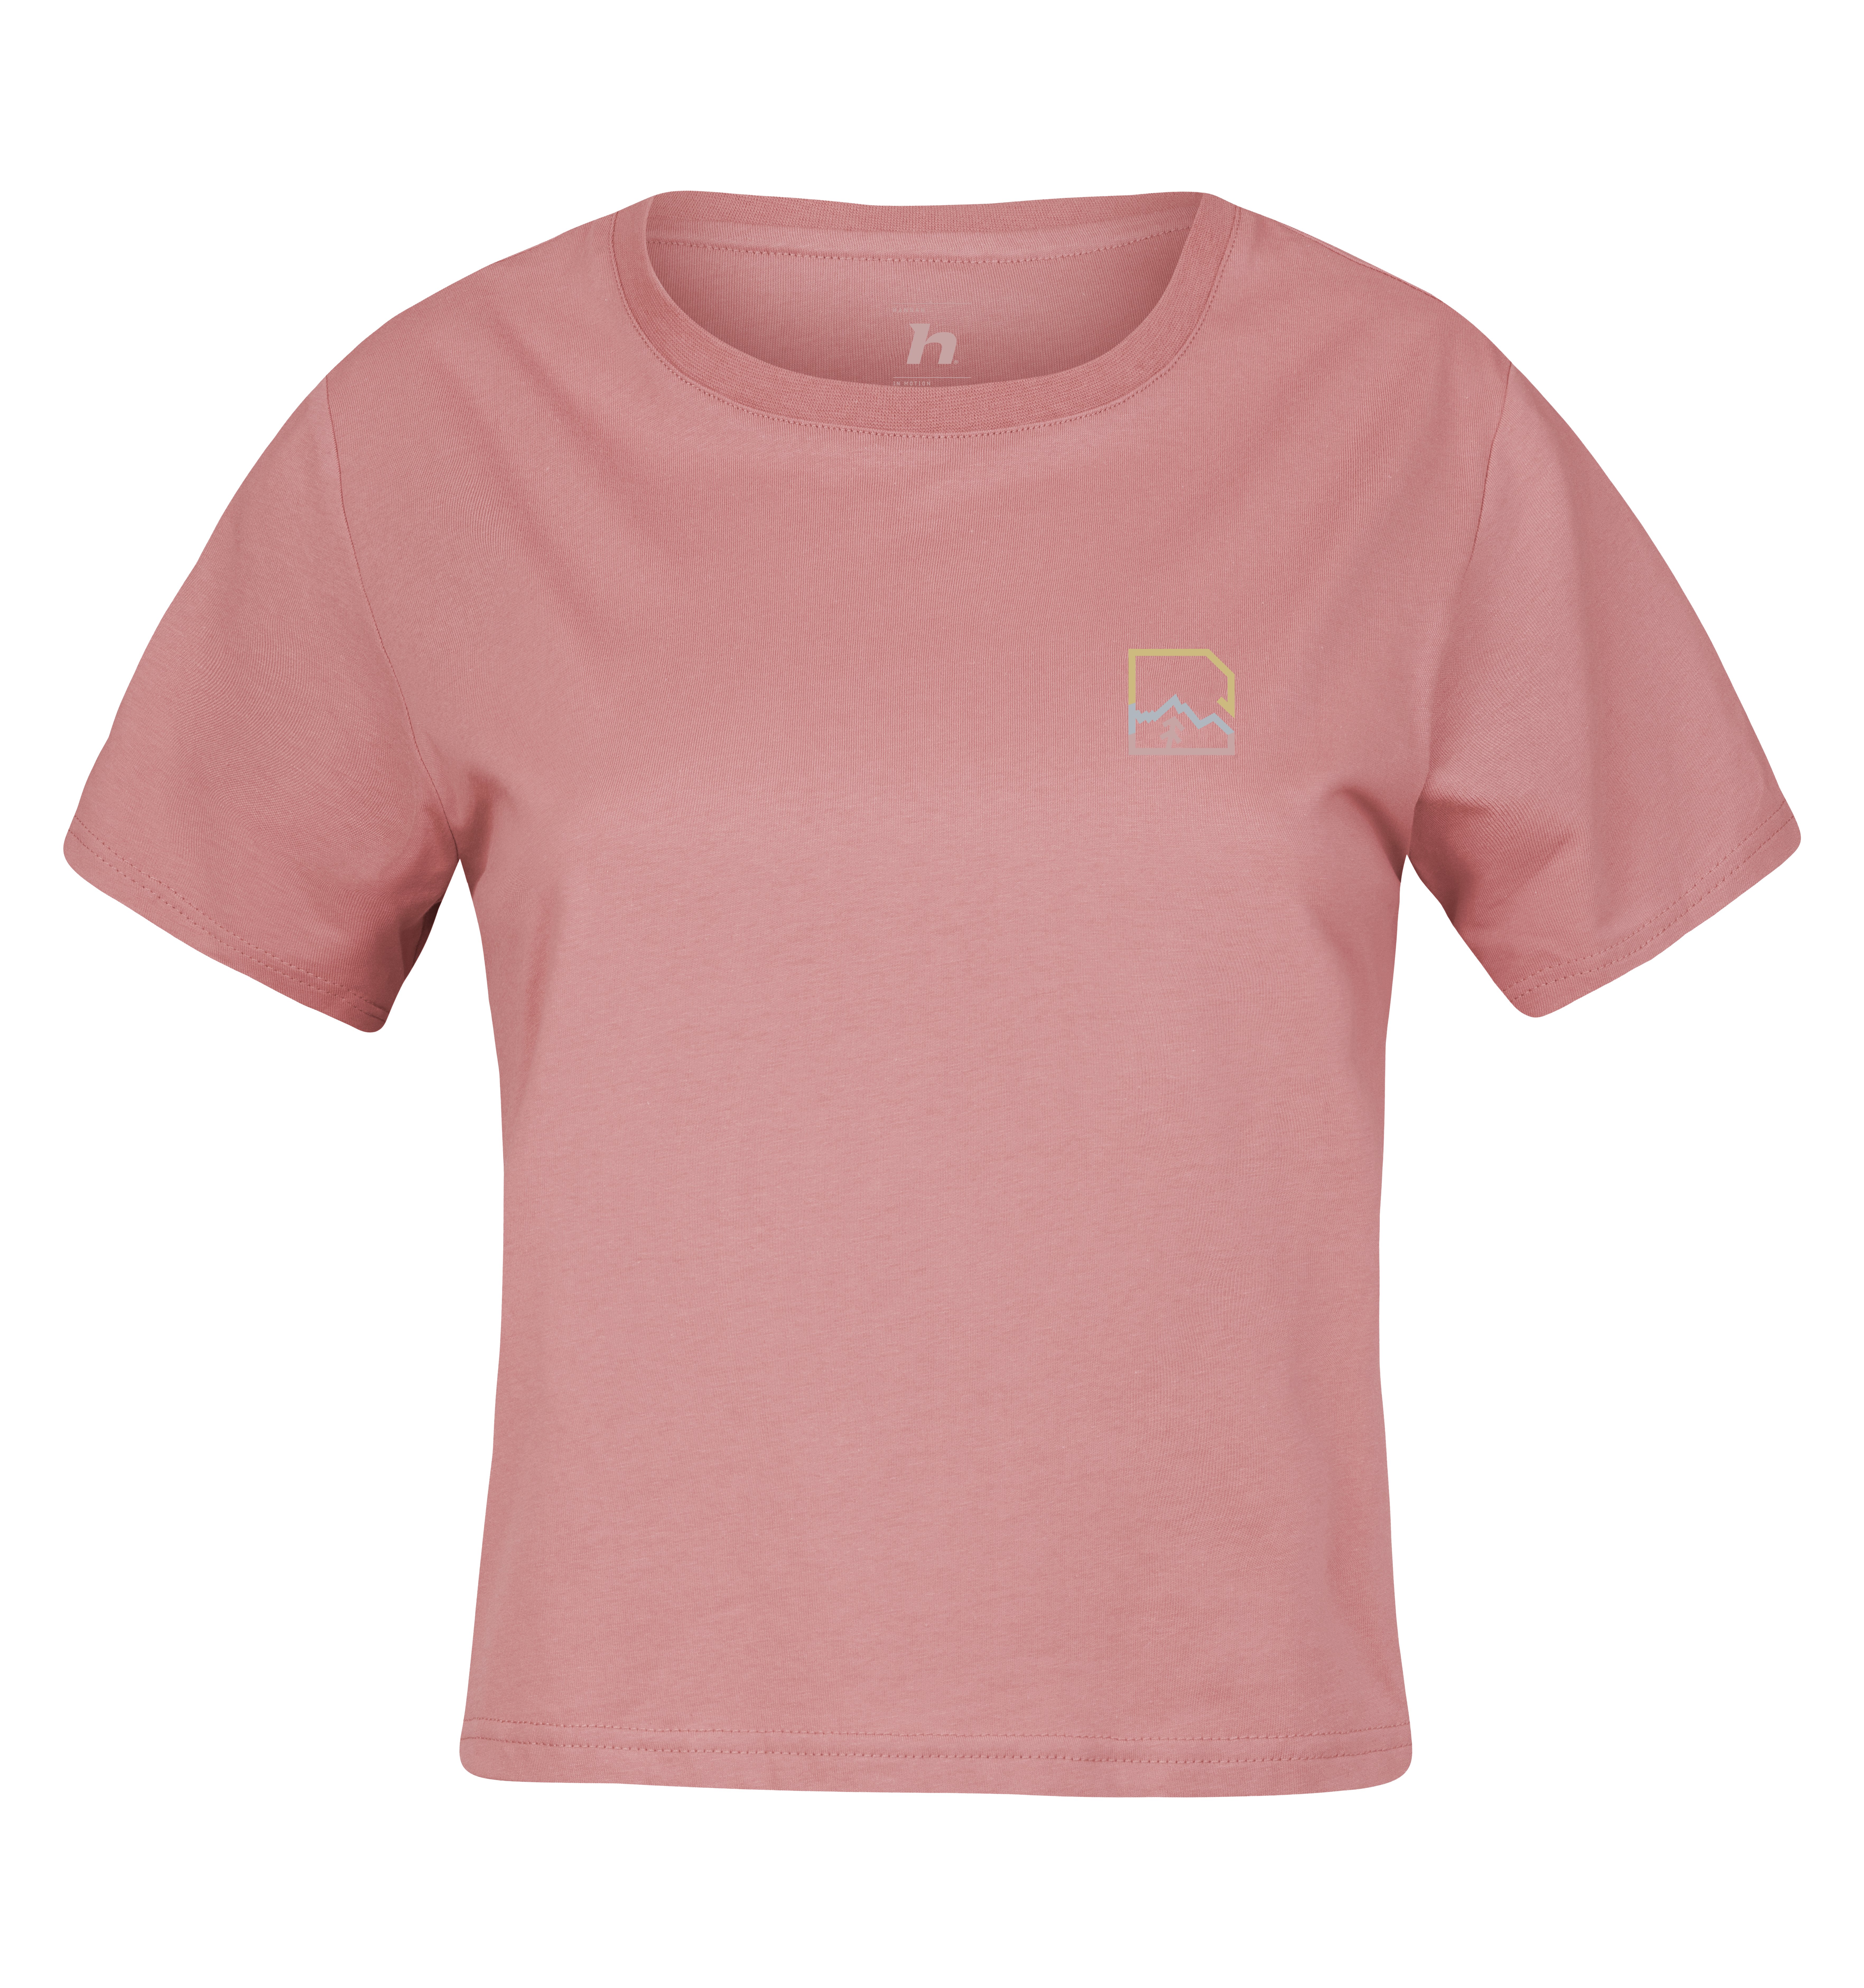 Women's T-shirt Hannah ELIN withered rose